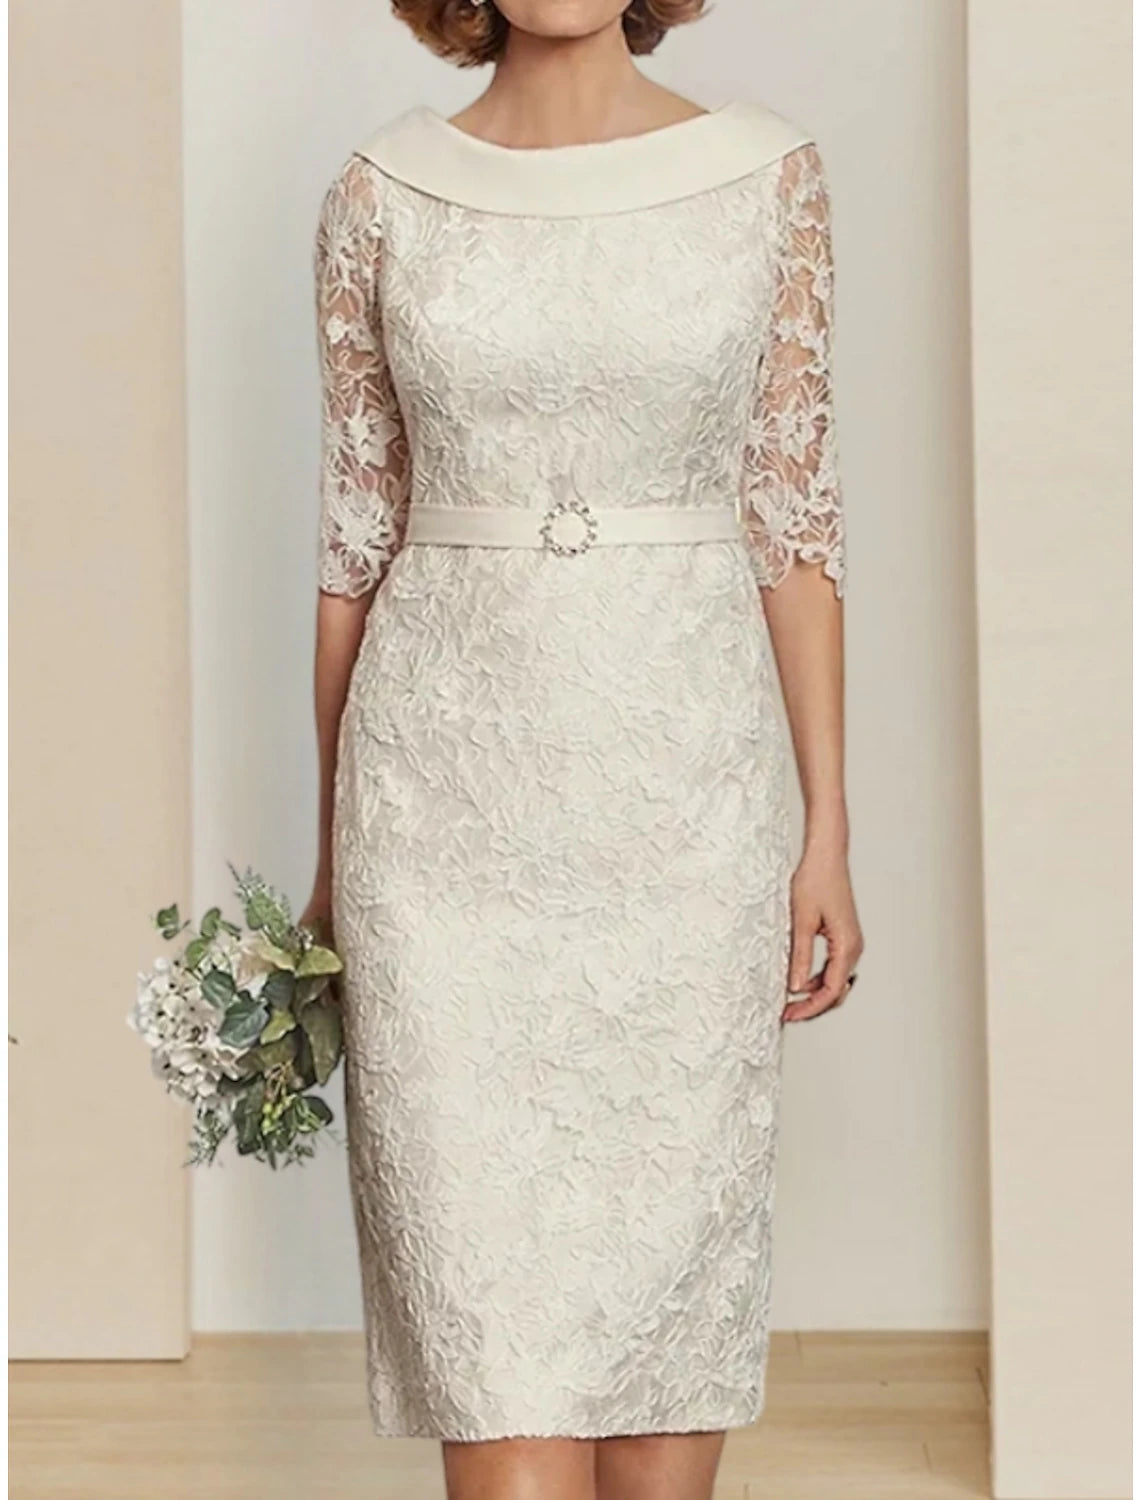 Sheath / Column Mother of the Bride Dress Little White Dresses Elegant Scoop Neck Knee Length Satin Lace Half Sleeve with Crystal Brooch